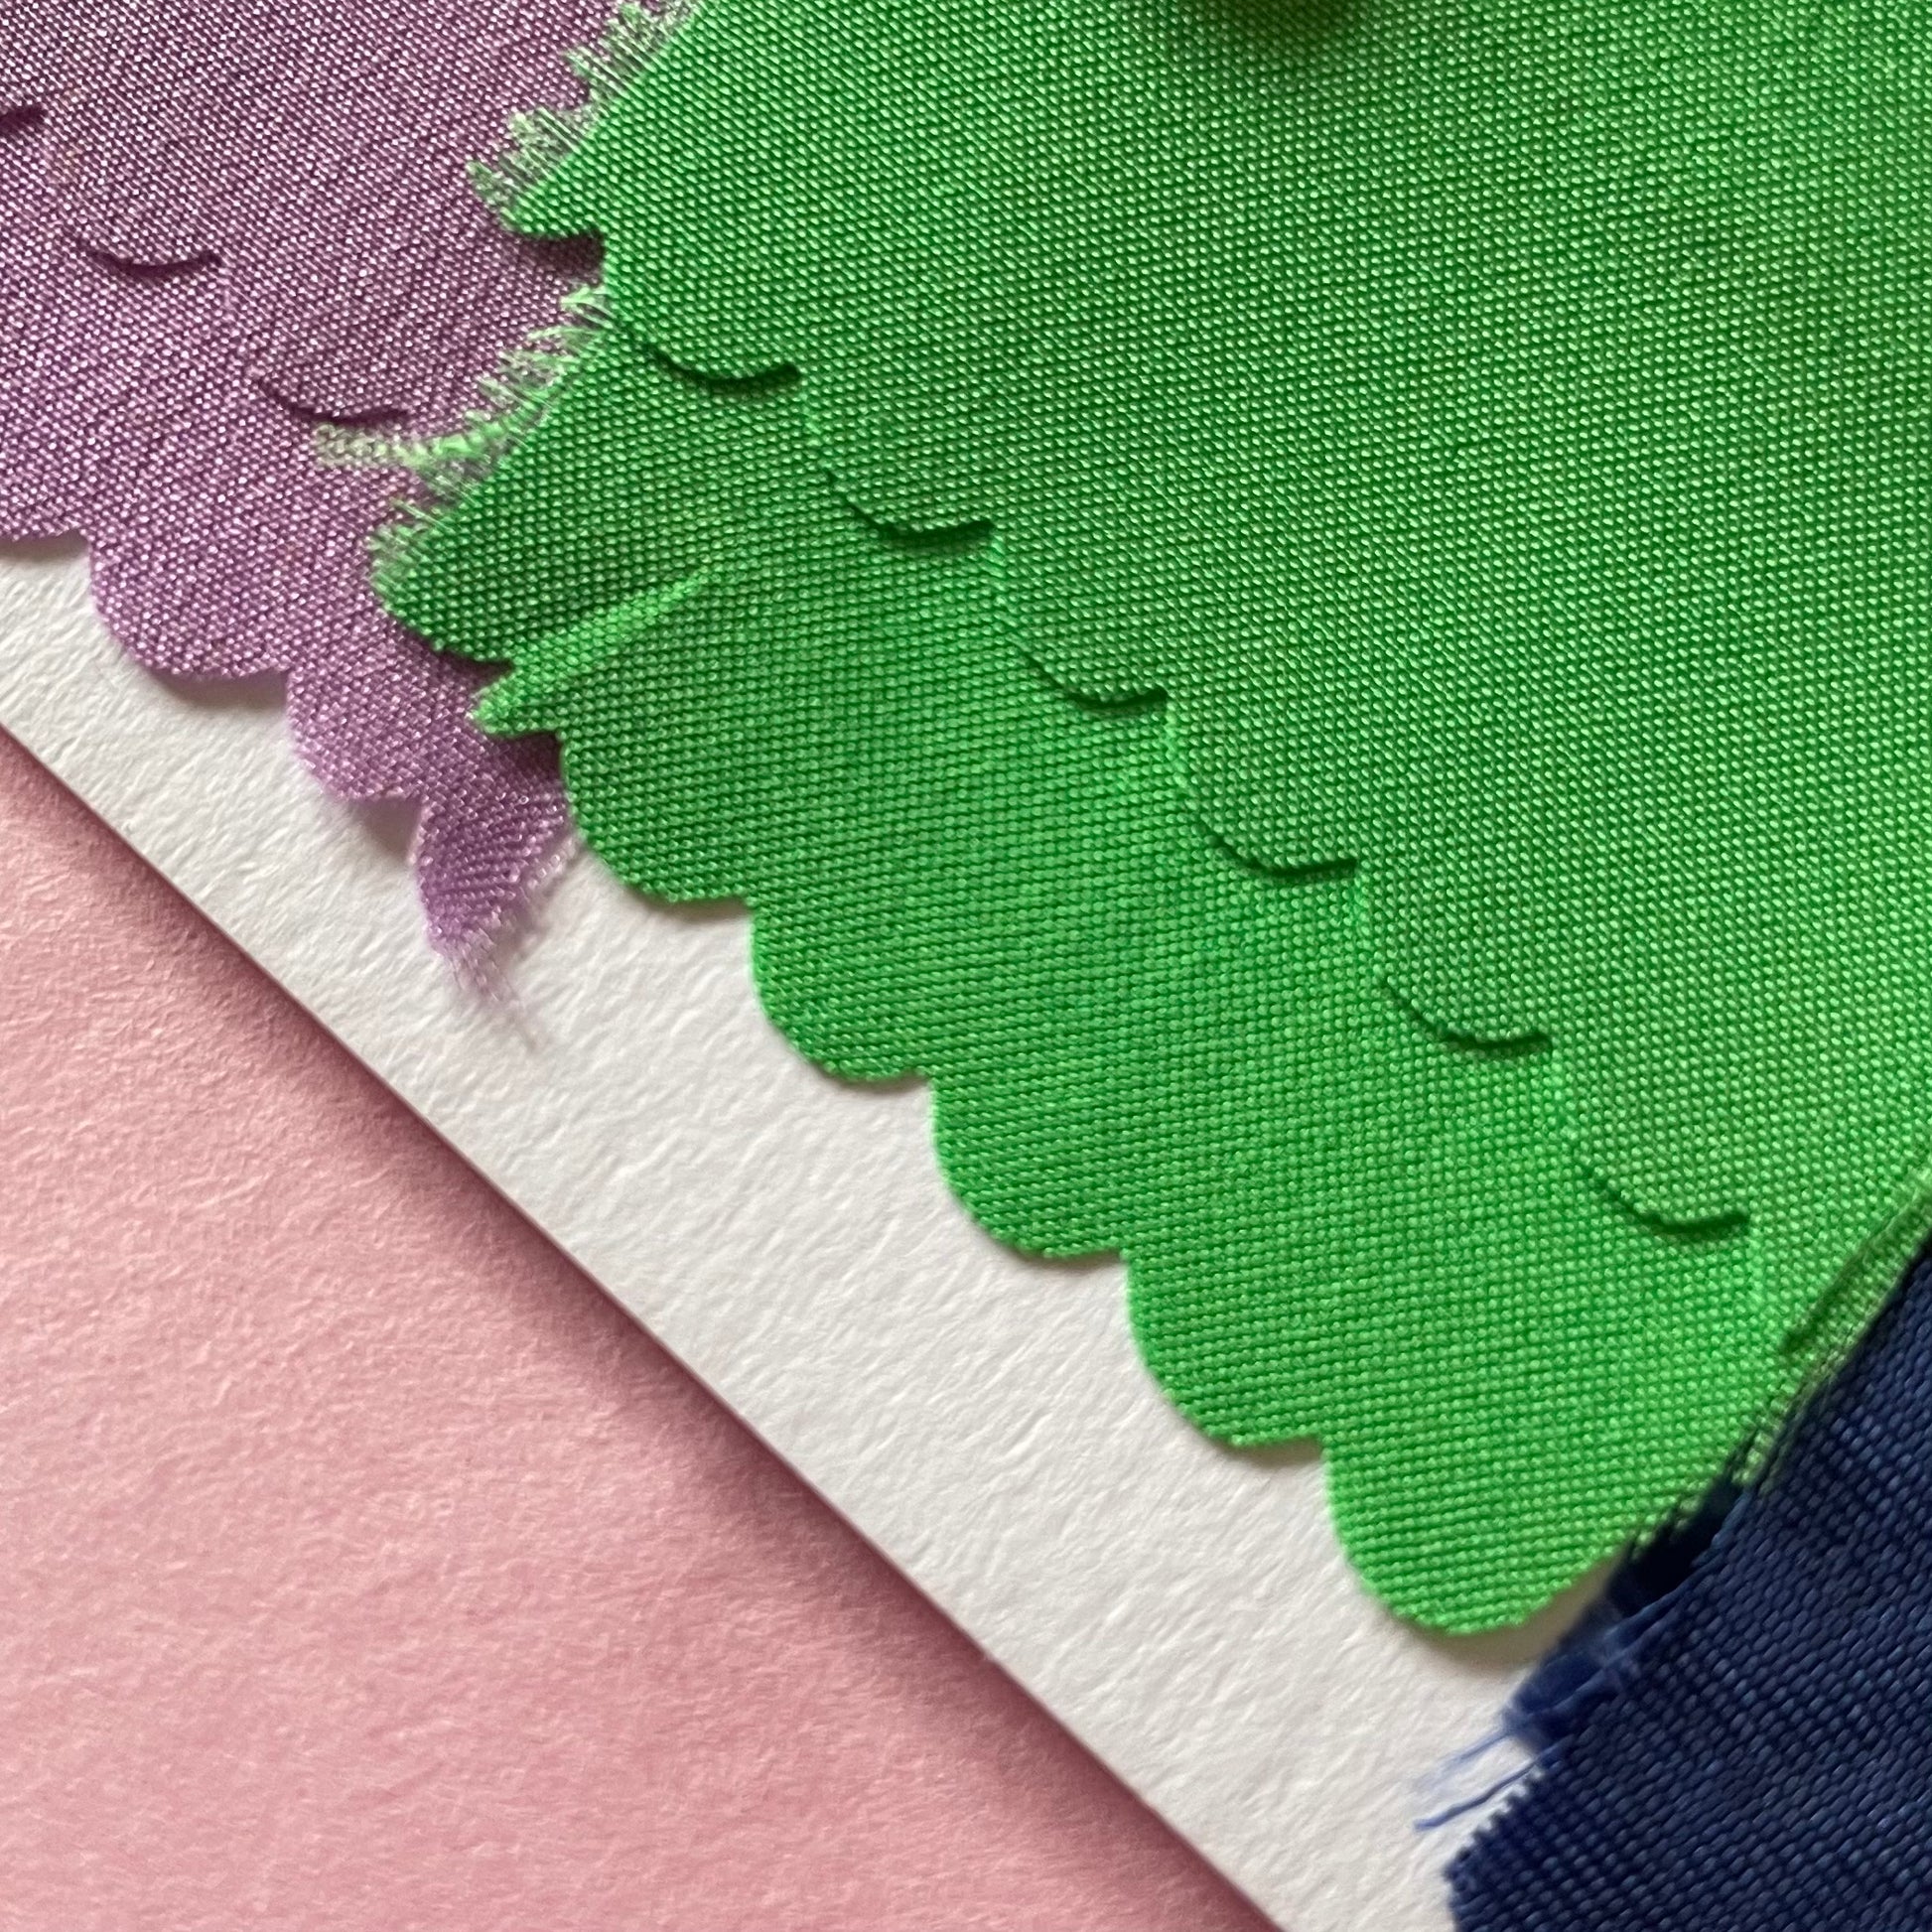 Close-up of fabrics used in the applique on the charm artworks. Lilac, green and the corner of navy blue fabric can be seen.